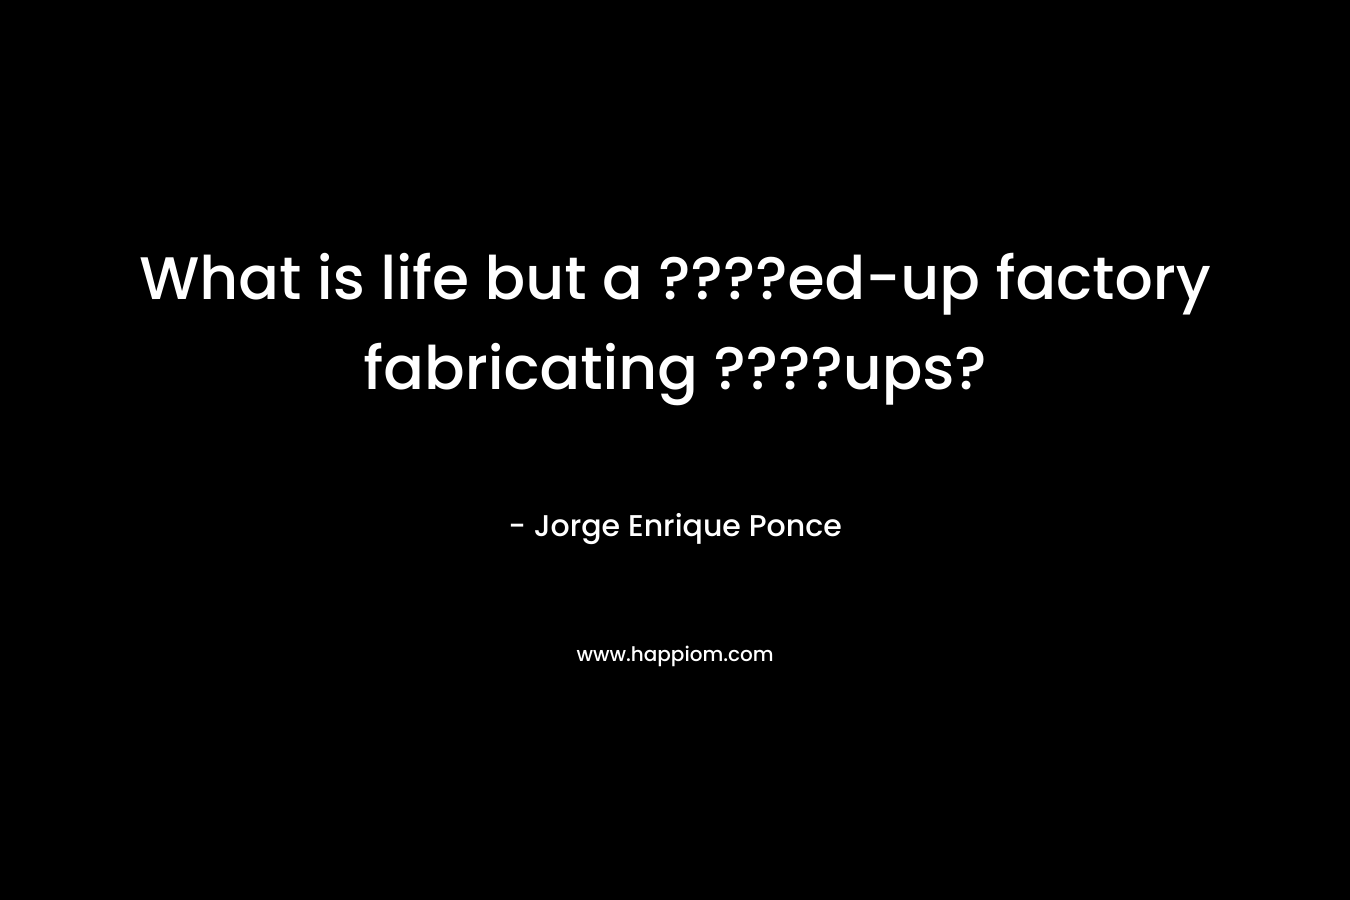 What is life but a ????ed-up factory fabricating ????ups? – Jorge Enrique Ponce